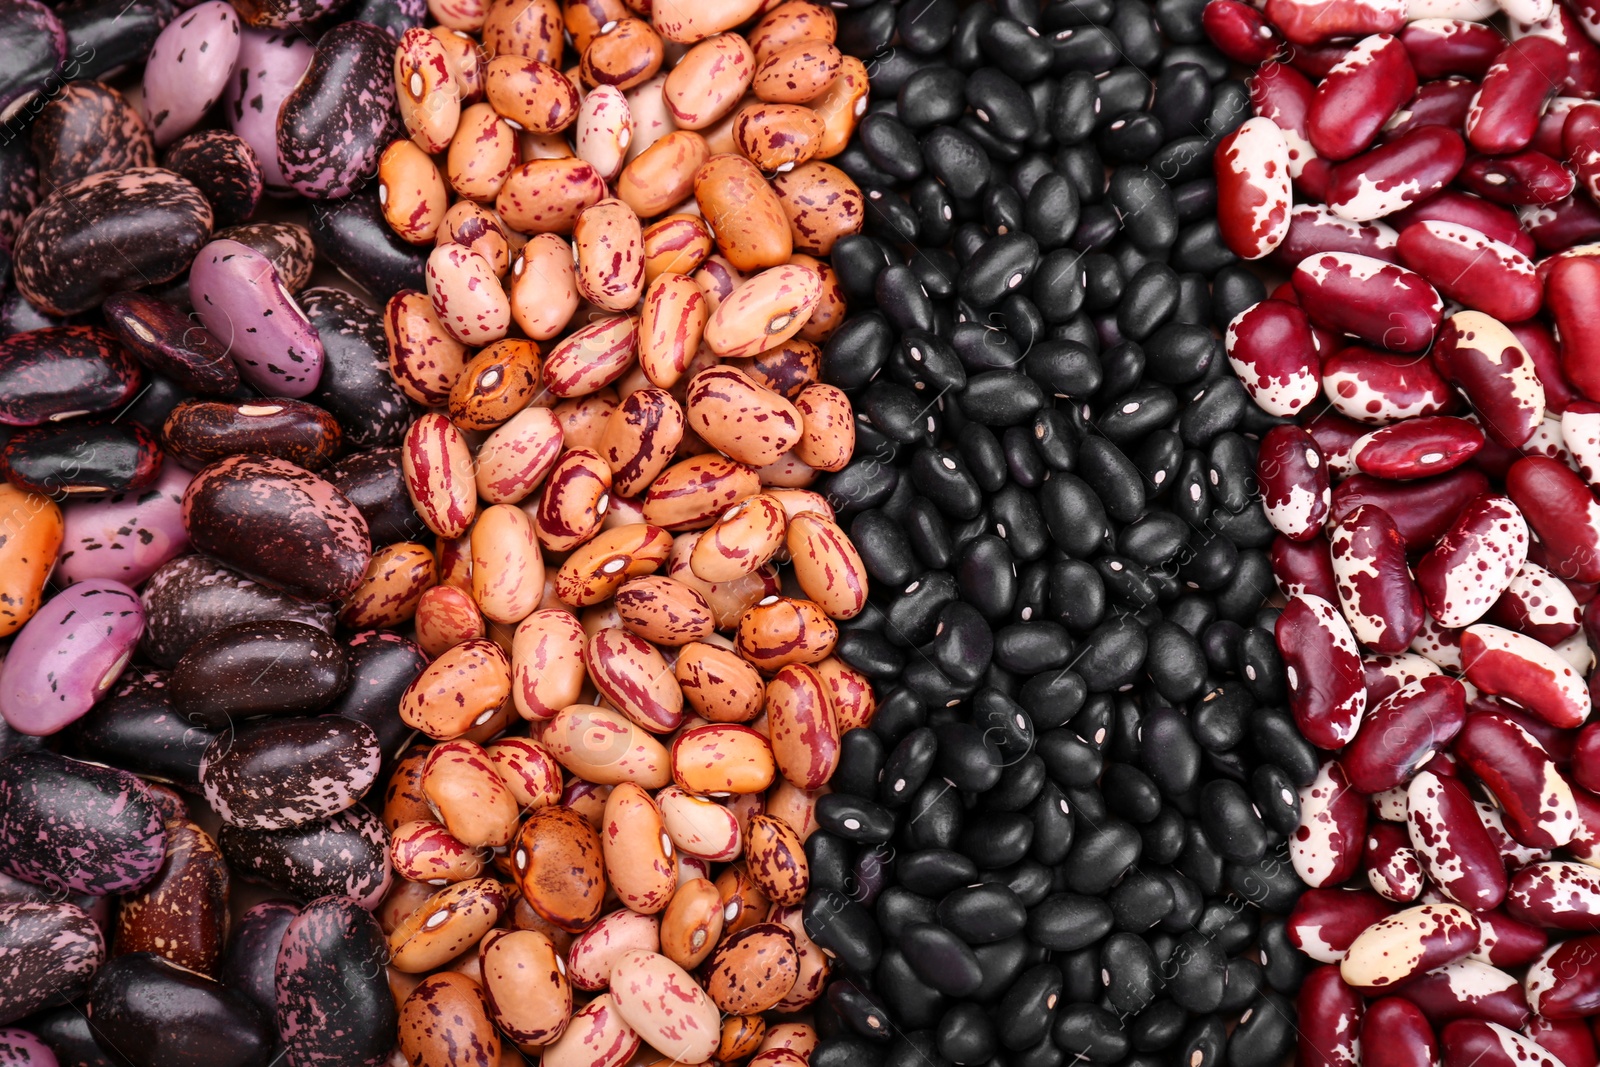 Photo of Different kinds of beans as background, closeup